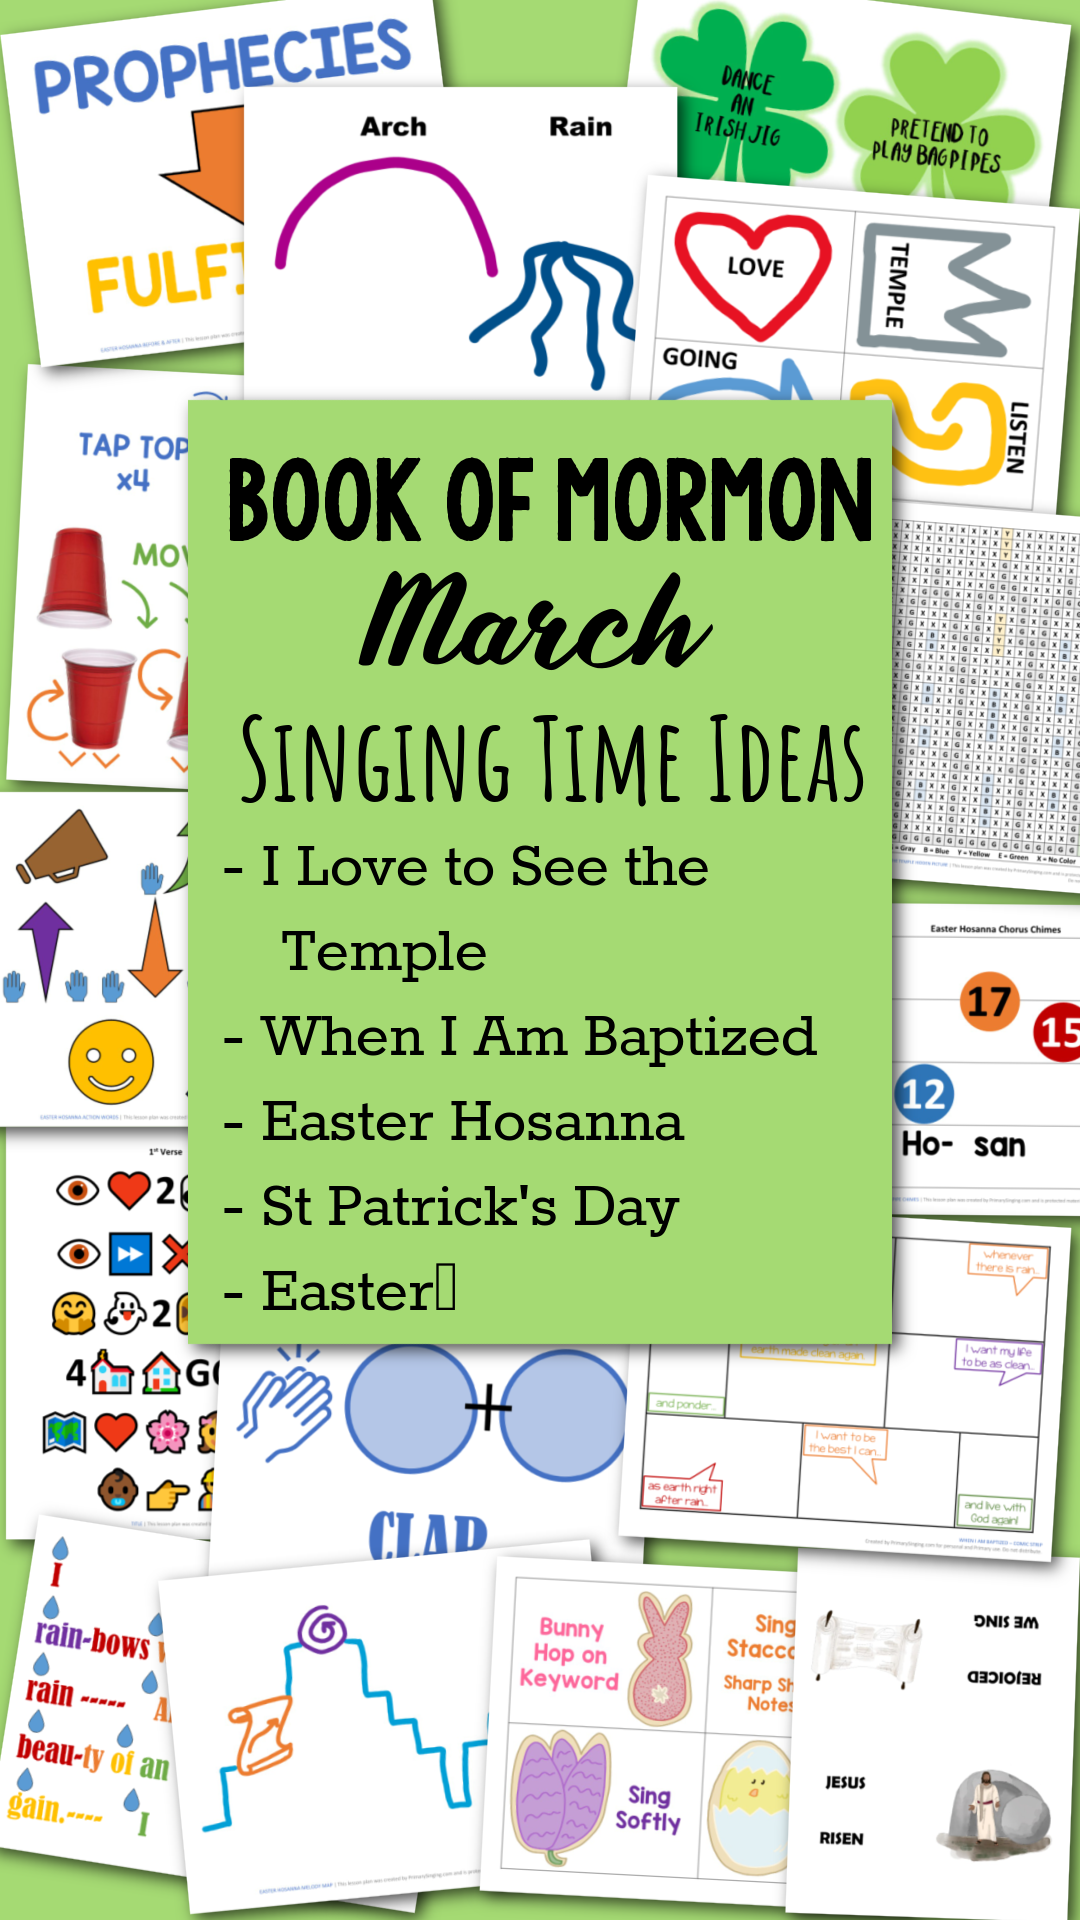 Book of Mormon March Primary Songs Singing Time ideas to help you teach I Love to See the Temple, When I Am Baptized, and Easter Hosanna. Plus, fun activities and ideas for St Patrick's Day and Easter! This packet is jam packed full with lesson plans and printable song helps for LDS Primary music leaders and great for home Come Follow Me use for families, too.